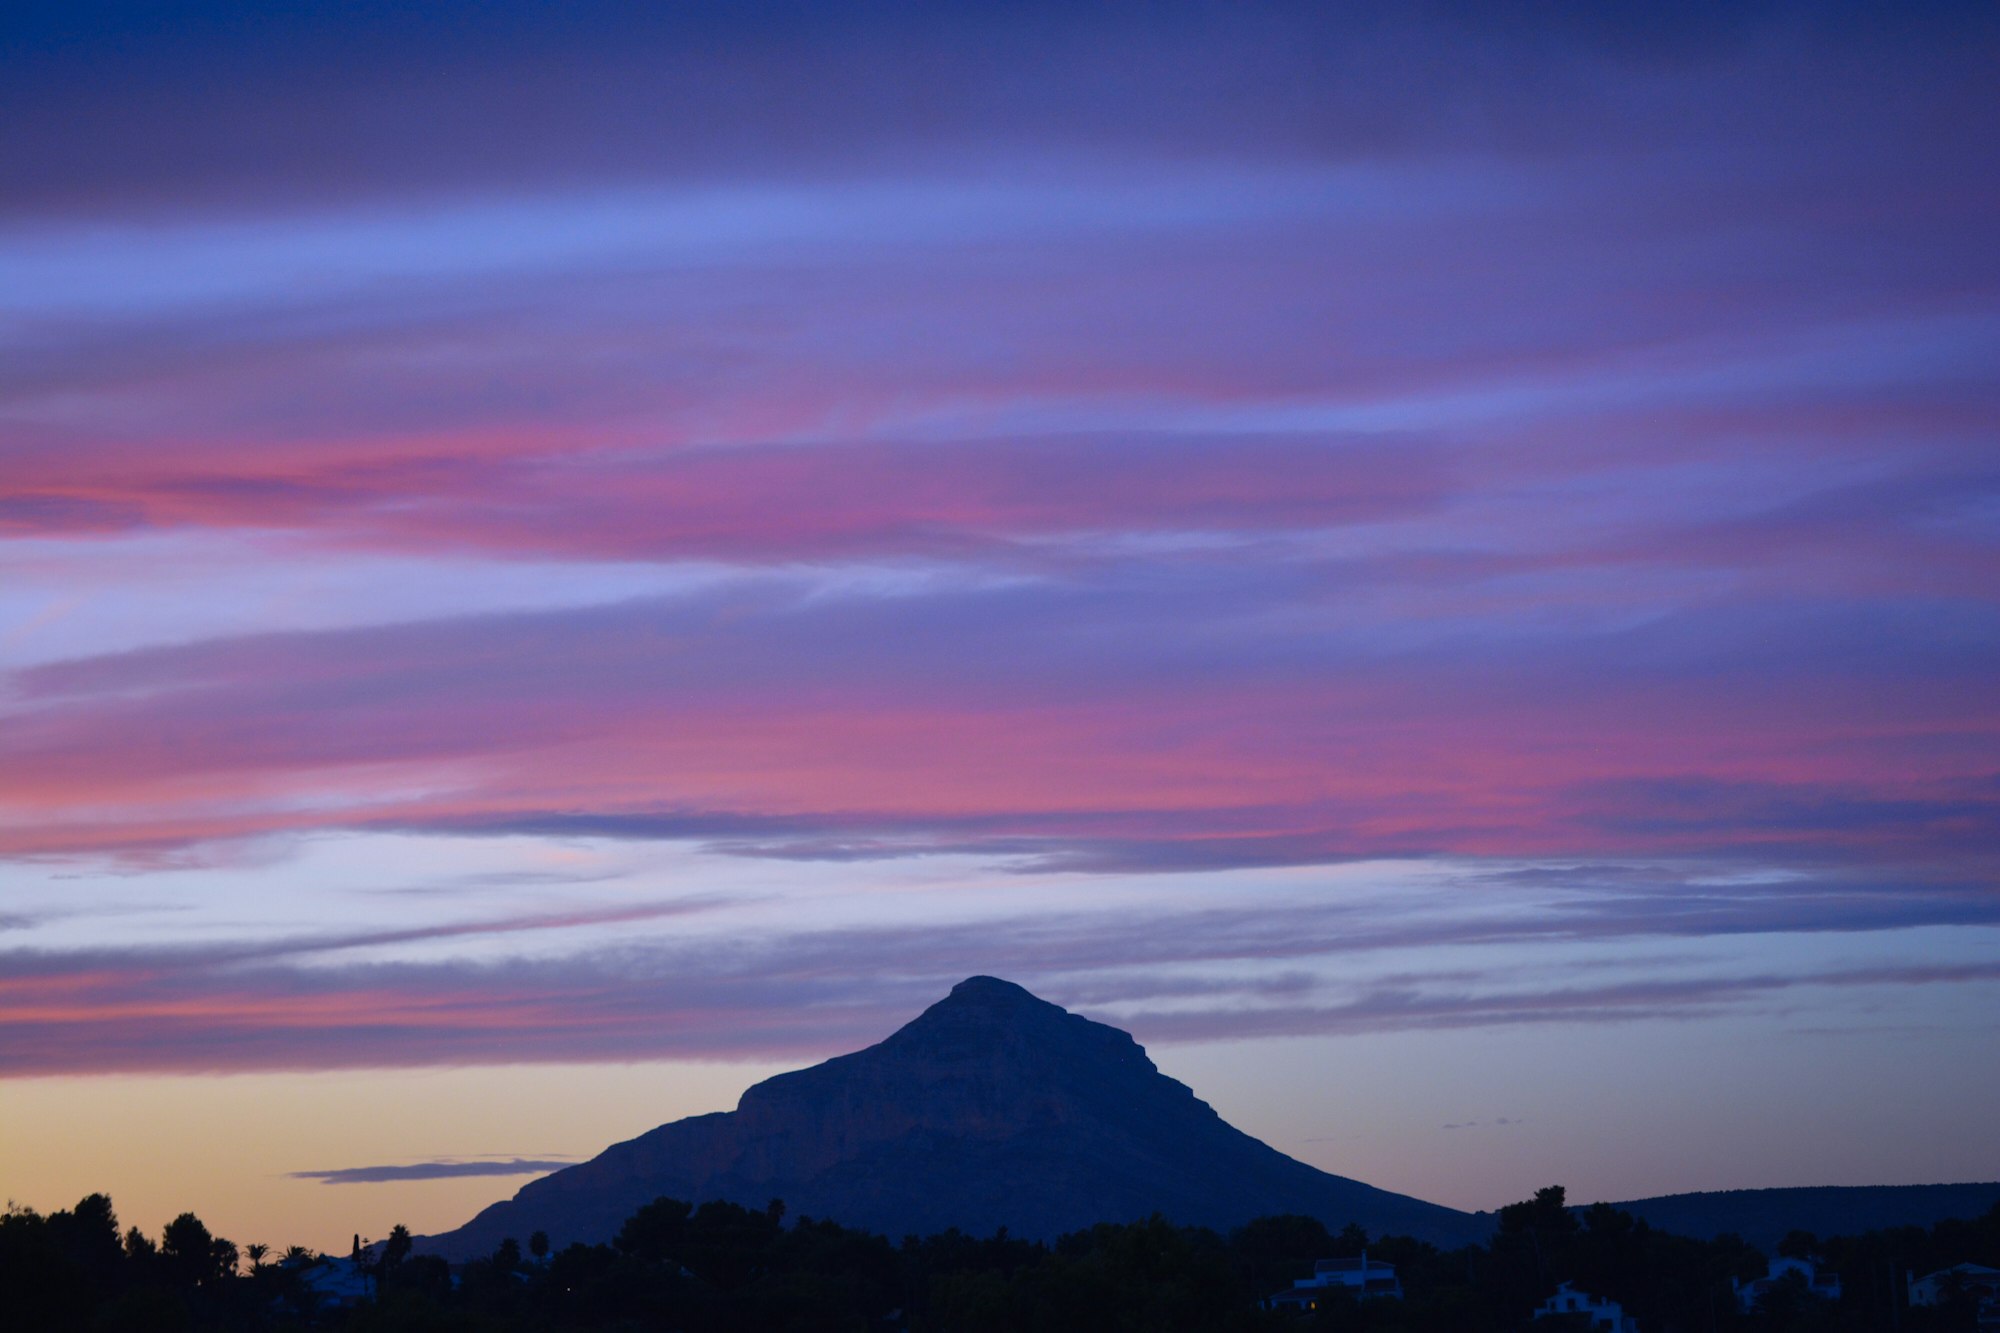 Sunset sky with Montgo Mountain in silhouette, Xabia / Javea, Alicante Province, Spain